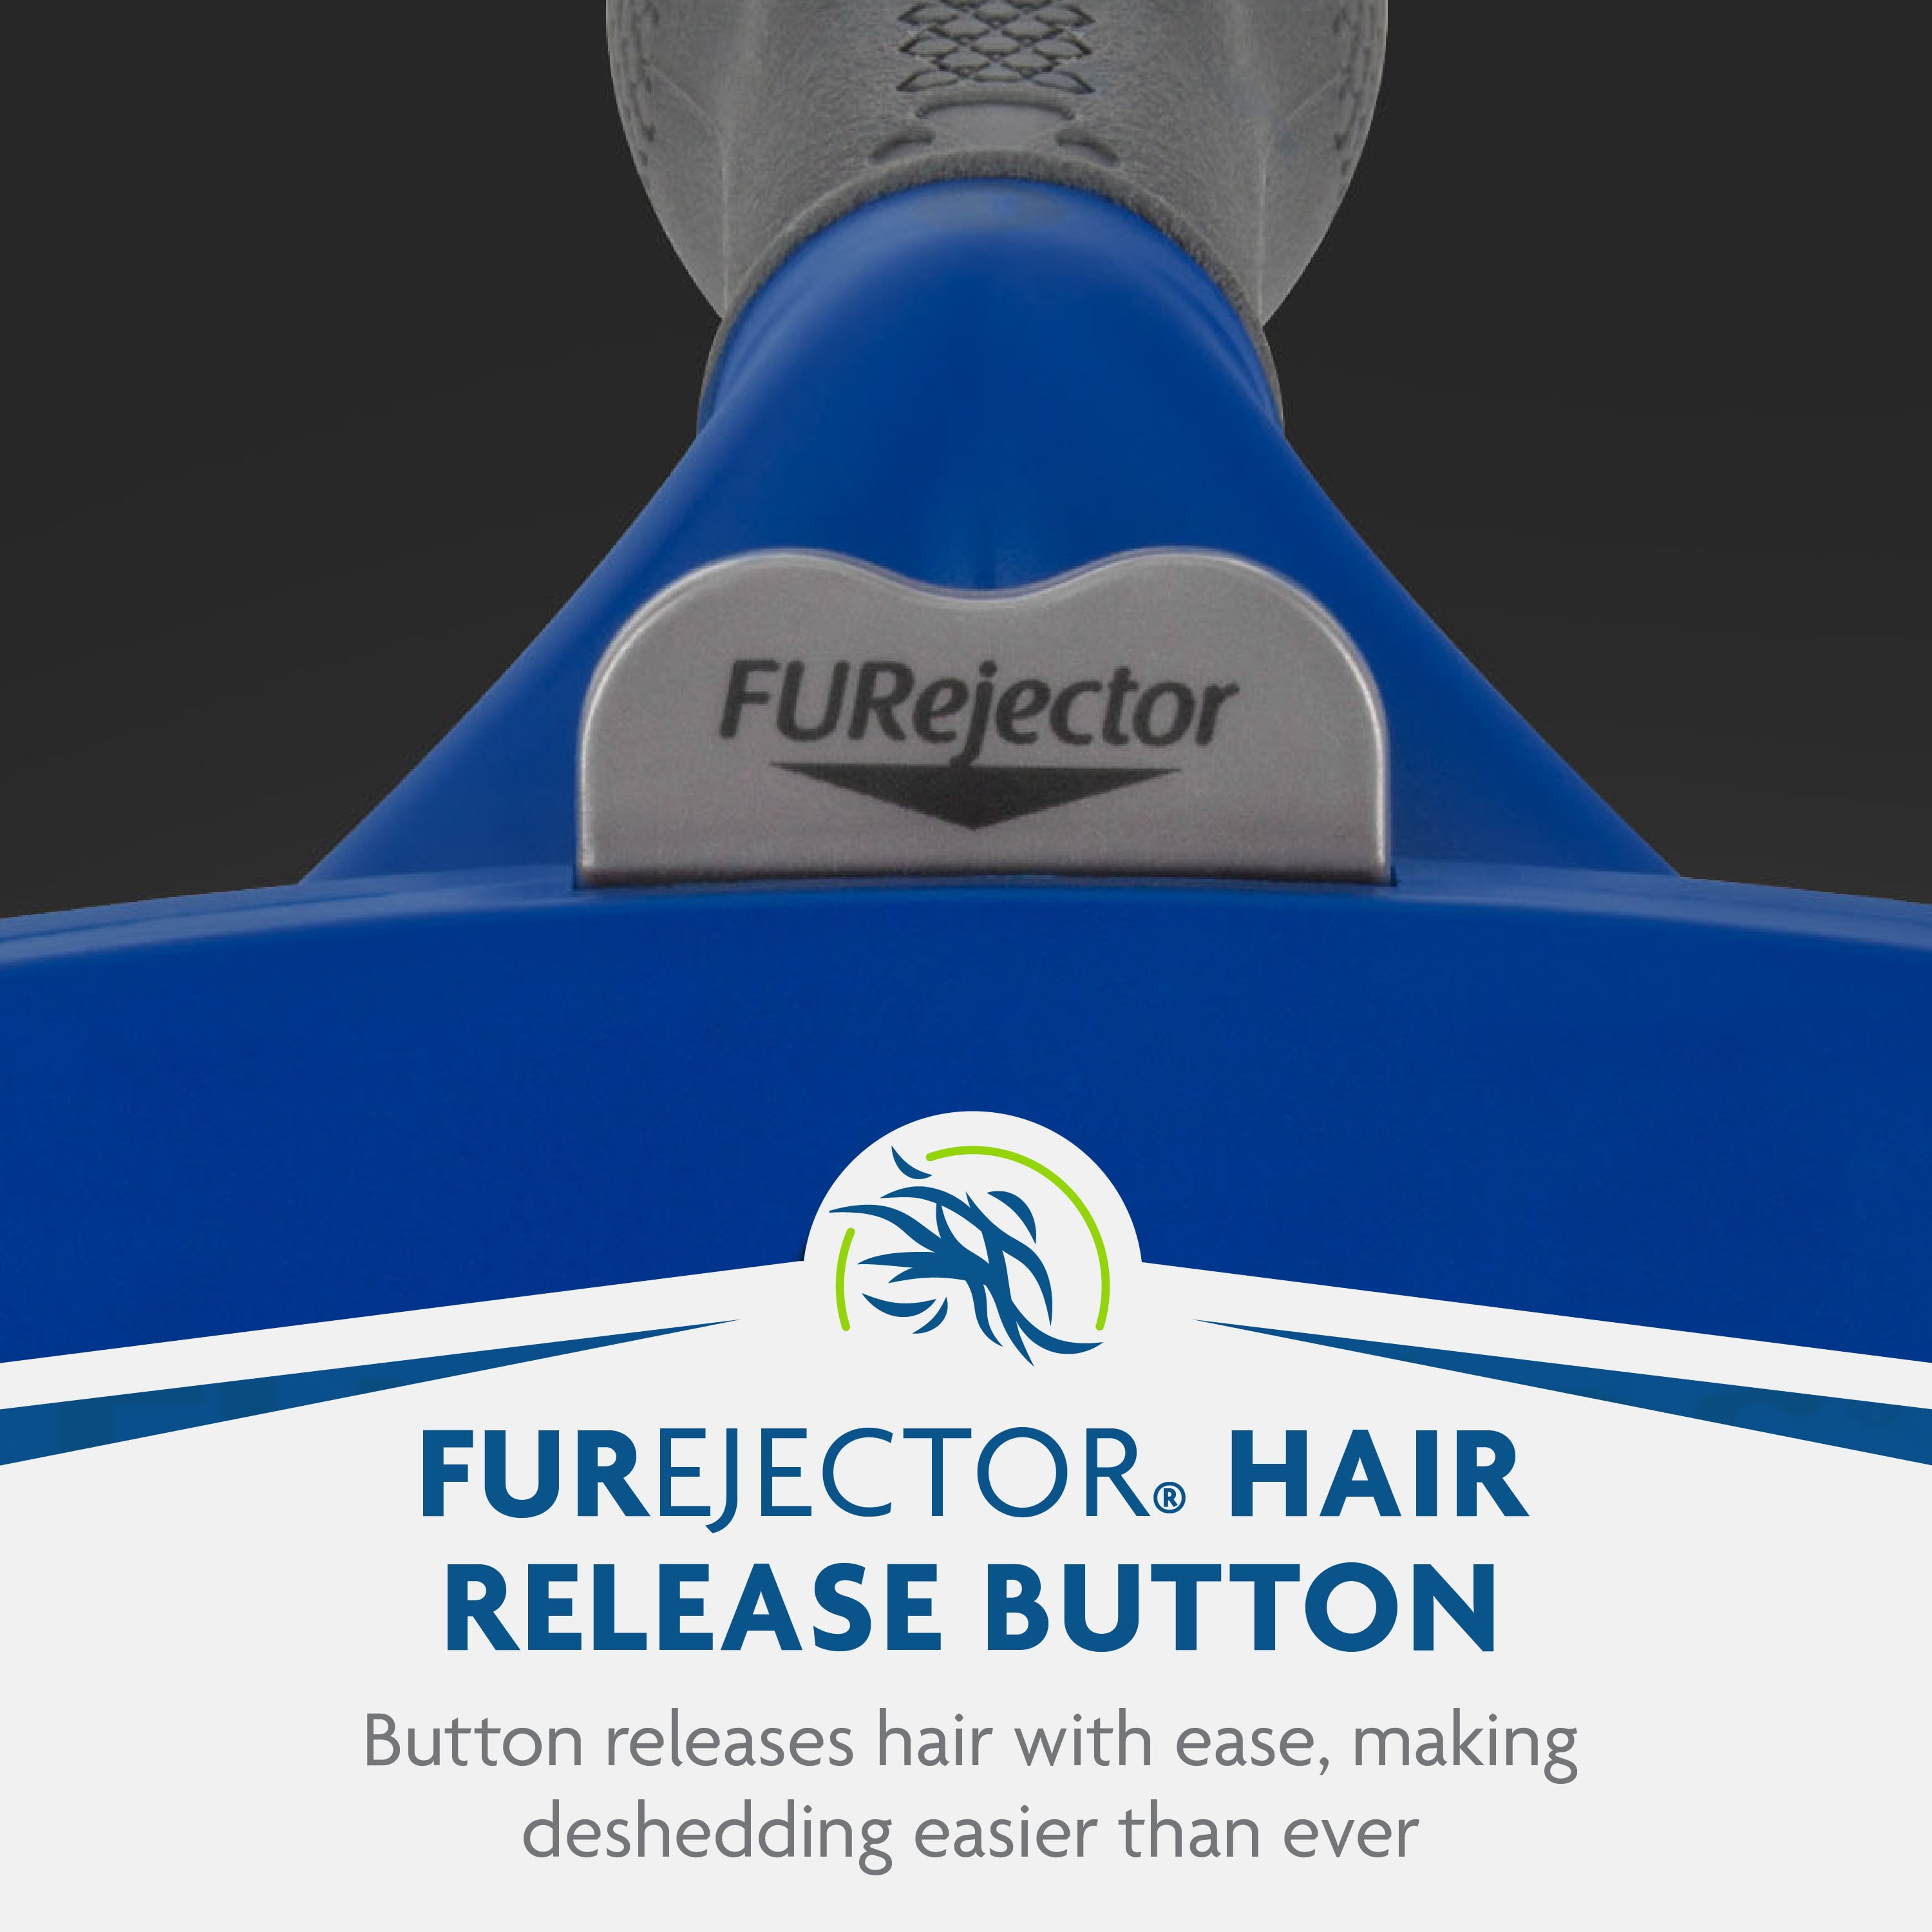 FURminator Long Hair deShedding Tool for Dogs Small – Pet Empire and  Supplies